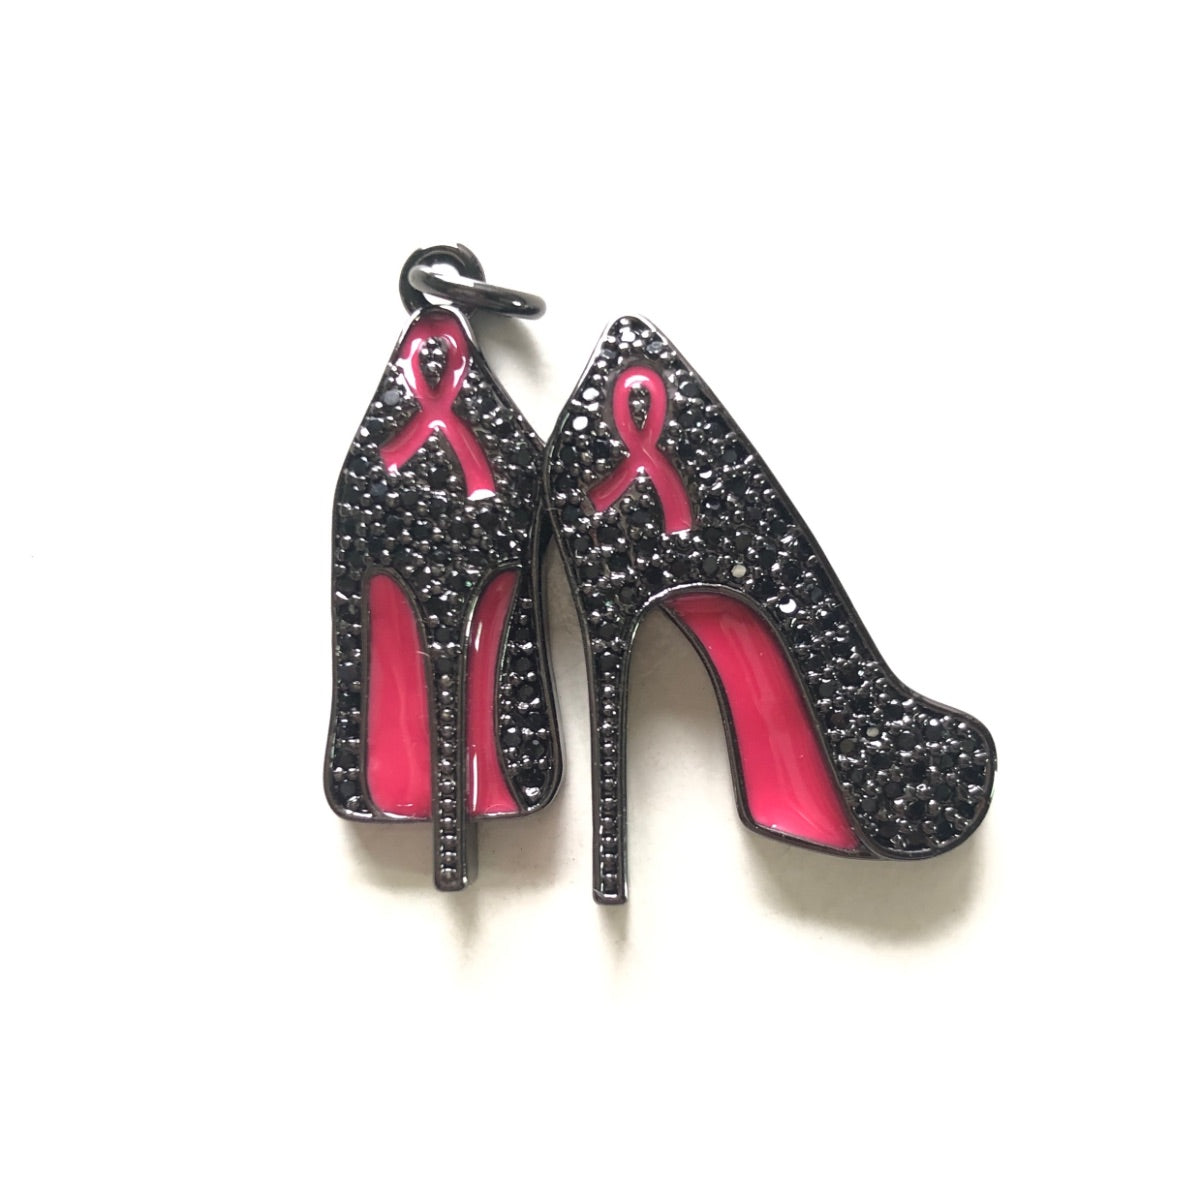 10pcs/lot CZ Pave Pink Ribbon High Heels Charms - Breast Cancer Awareness Black on Black CZ Paved Charms Breast Cancer Awareness High Heels New Charms Arrivals Charms Beads Beyond